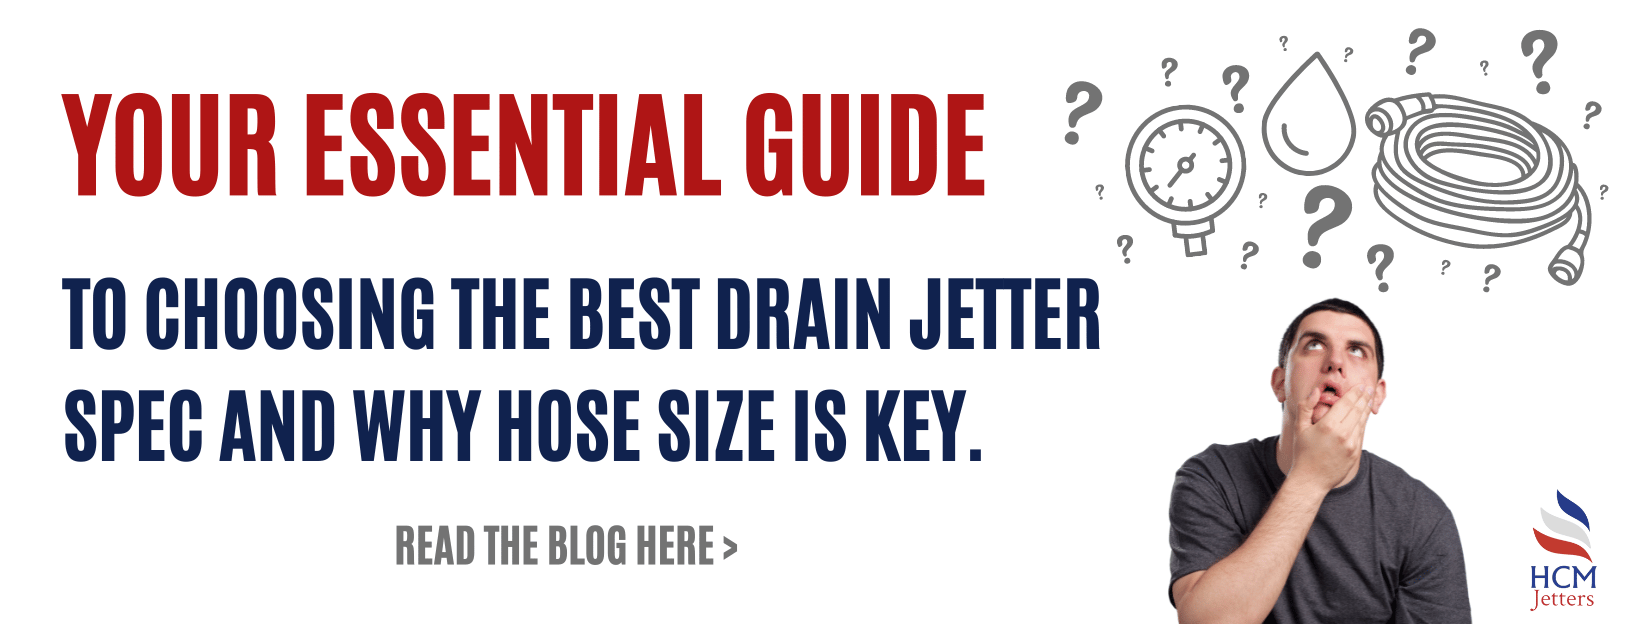 Your Essential Guide: Choosing the best Drain Jetter Spec and why hose size is key